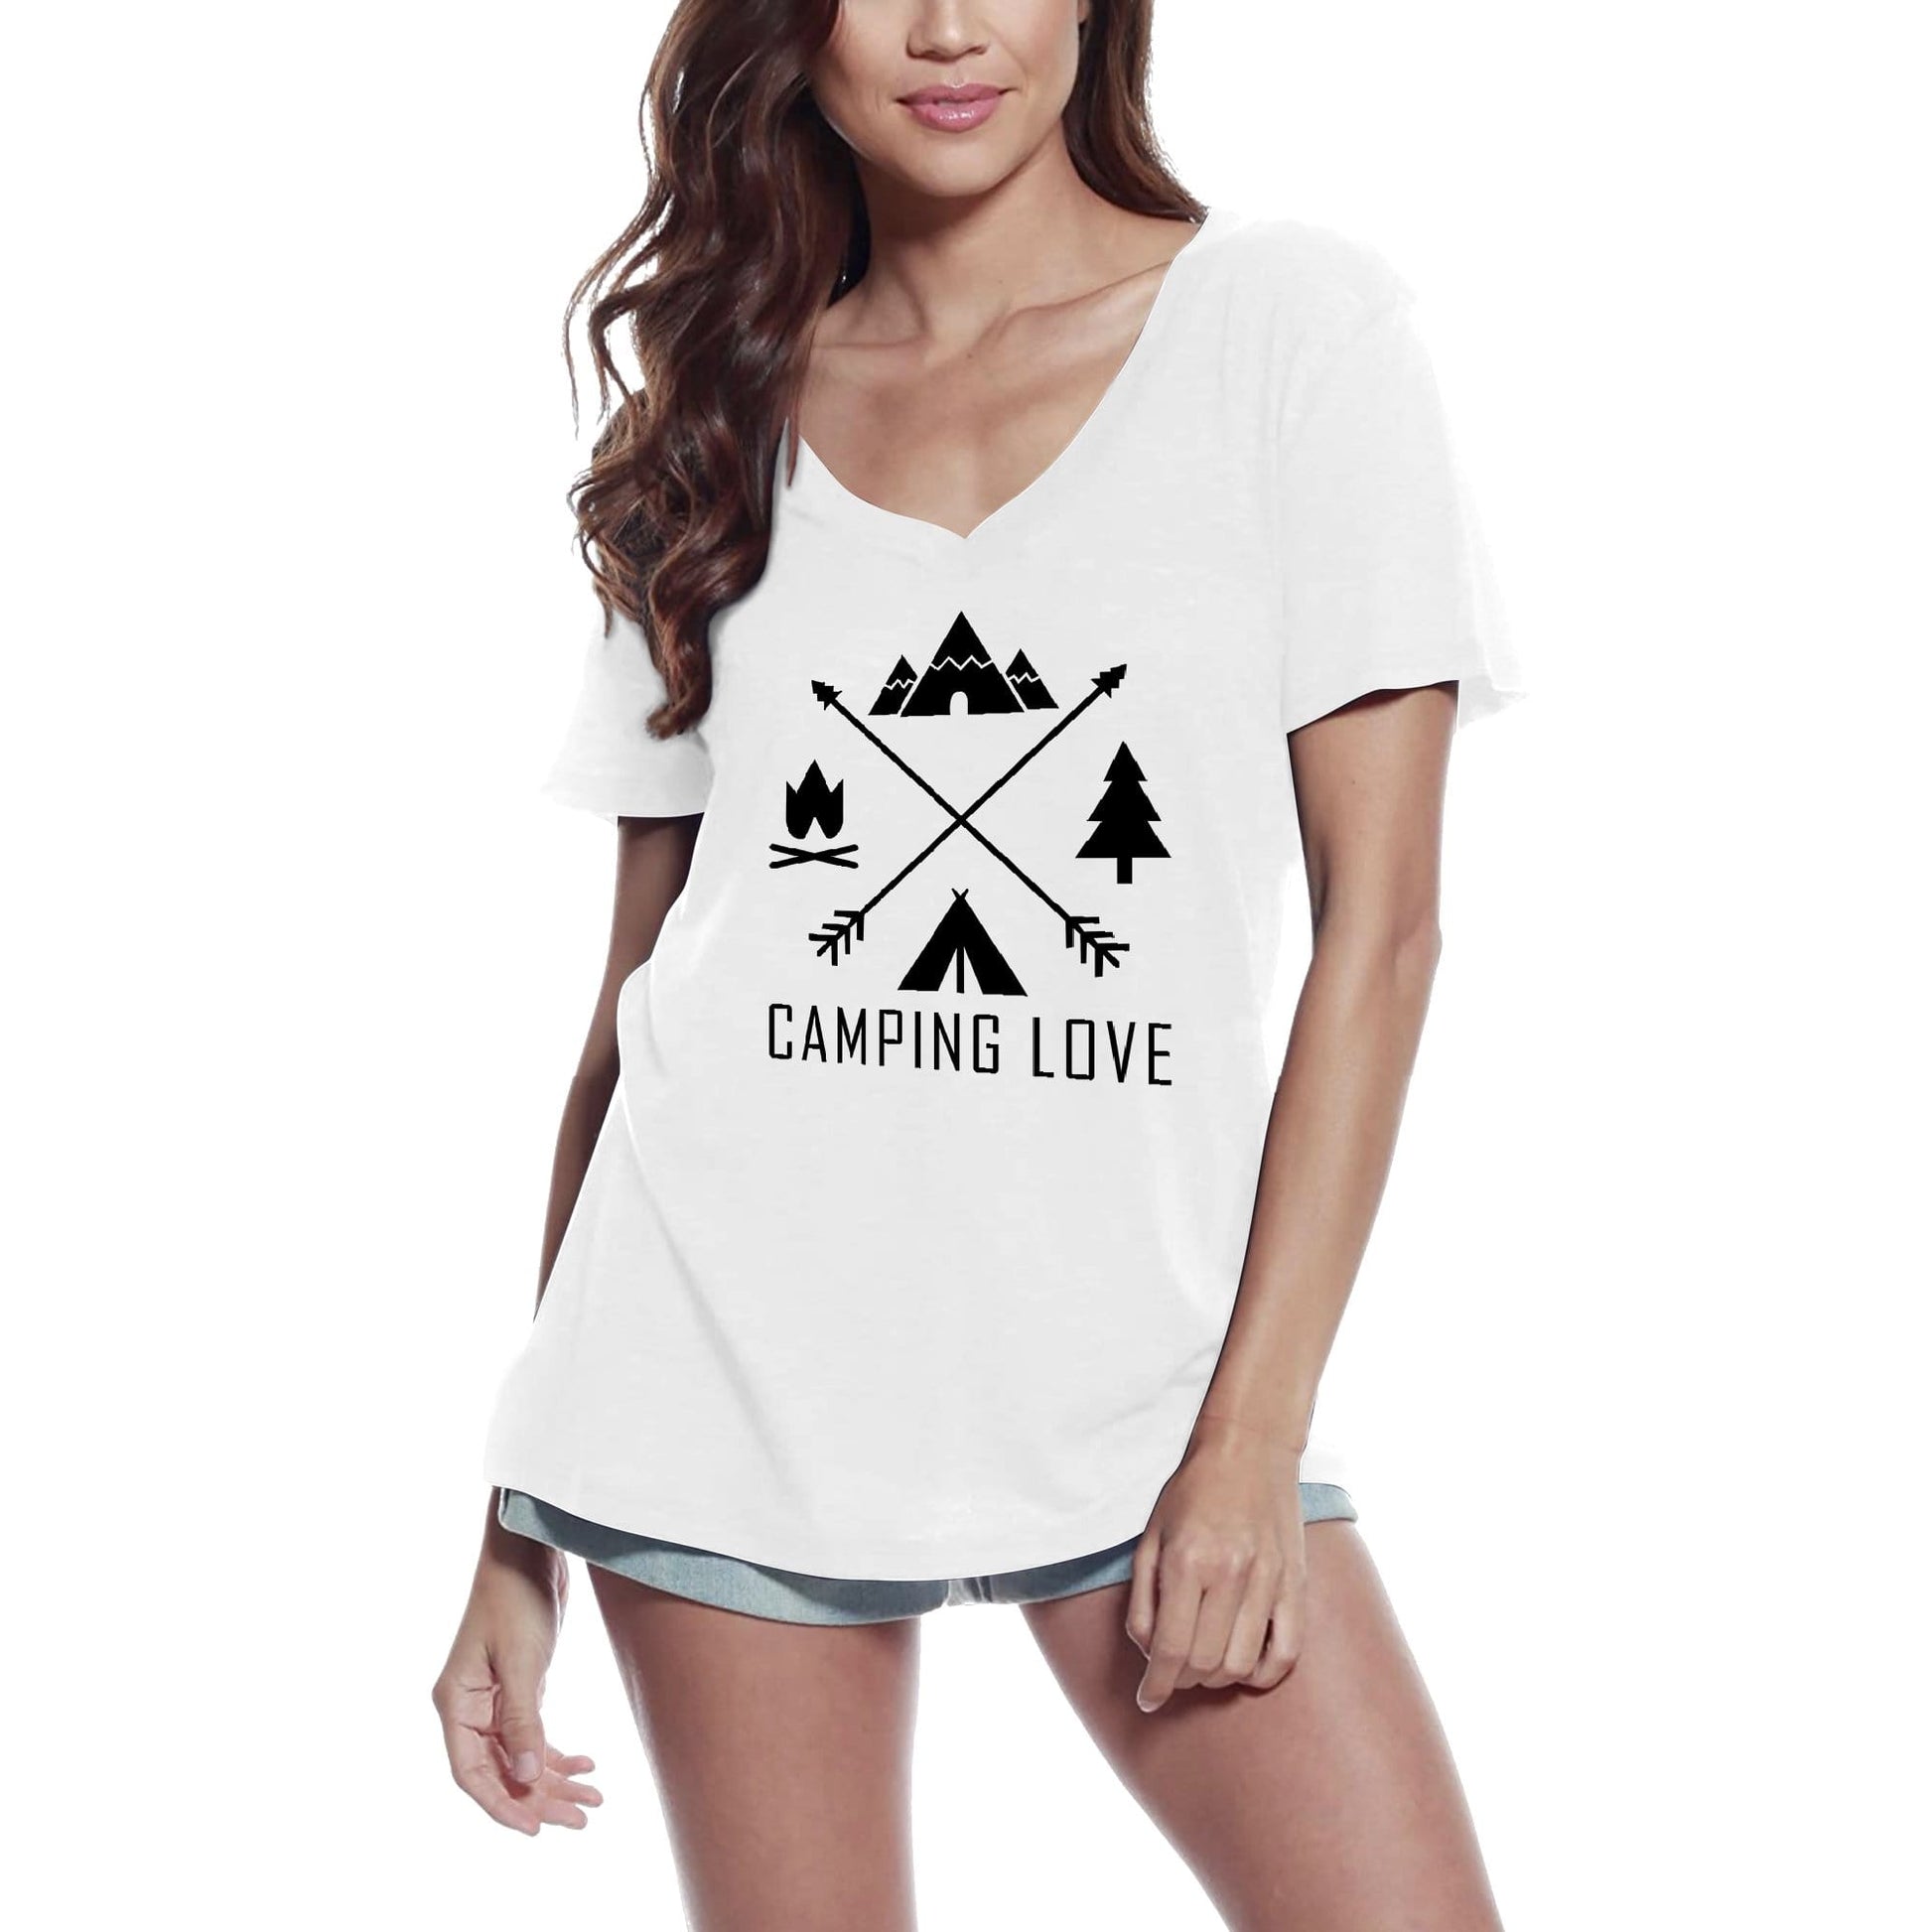 ULTRABASIC Women's T-Shirt Adventure Shirt - Love Camping - Novelty Shirts for Women happy camper t shirt women tshirts camping long sleeve summer patagonia camp gifts cotton mountains adventure merch time clothes girly girl original t shirts outdoor travel buddies road trip novelty bike travel sport fish retro mountain wolf